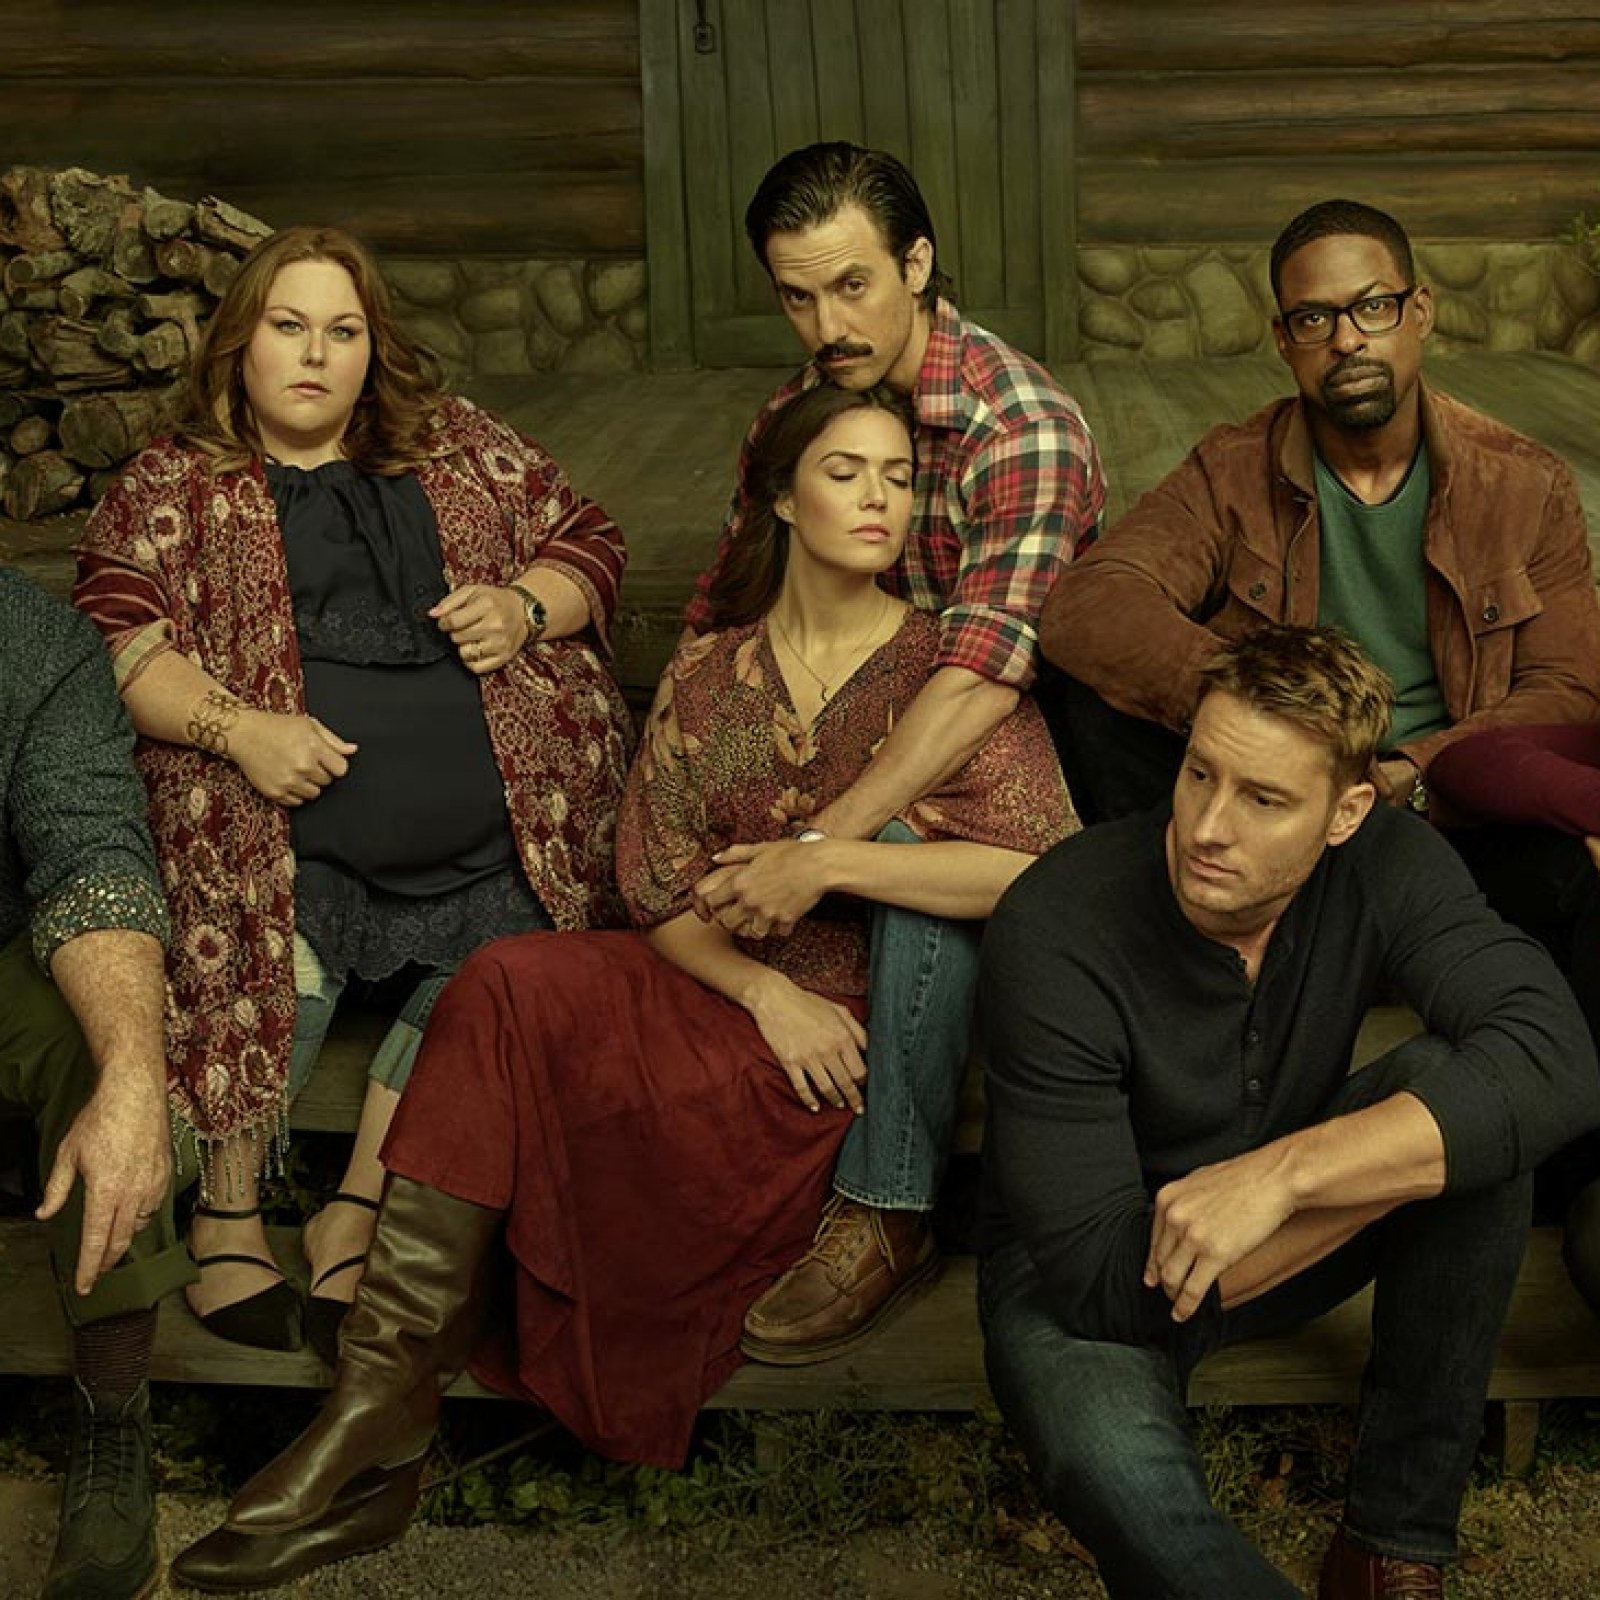 This Is Us season 6: how many episodes - and when is finale?